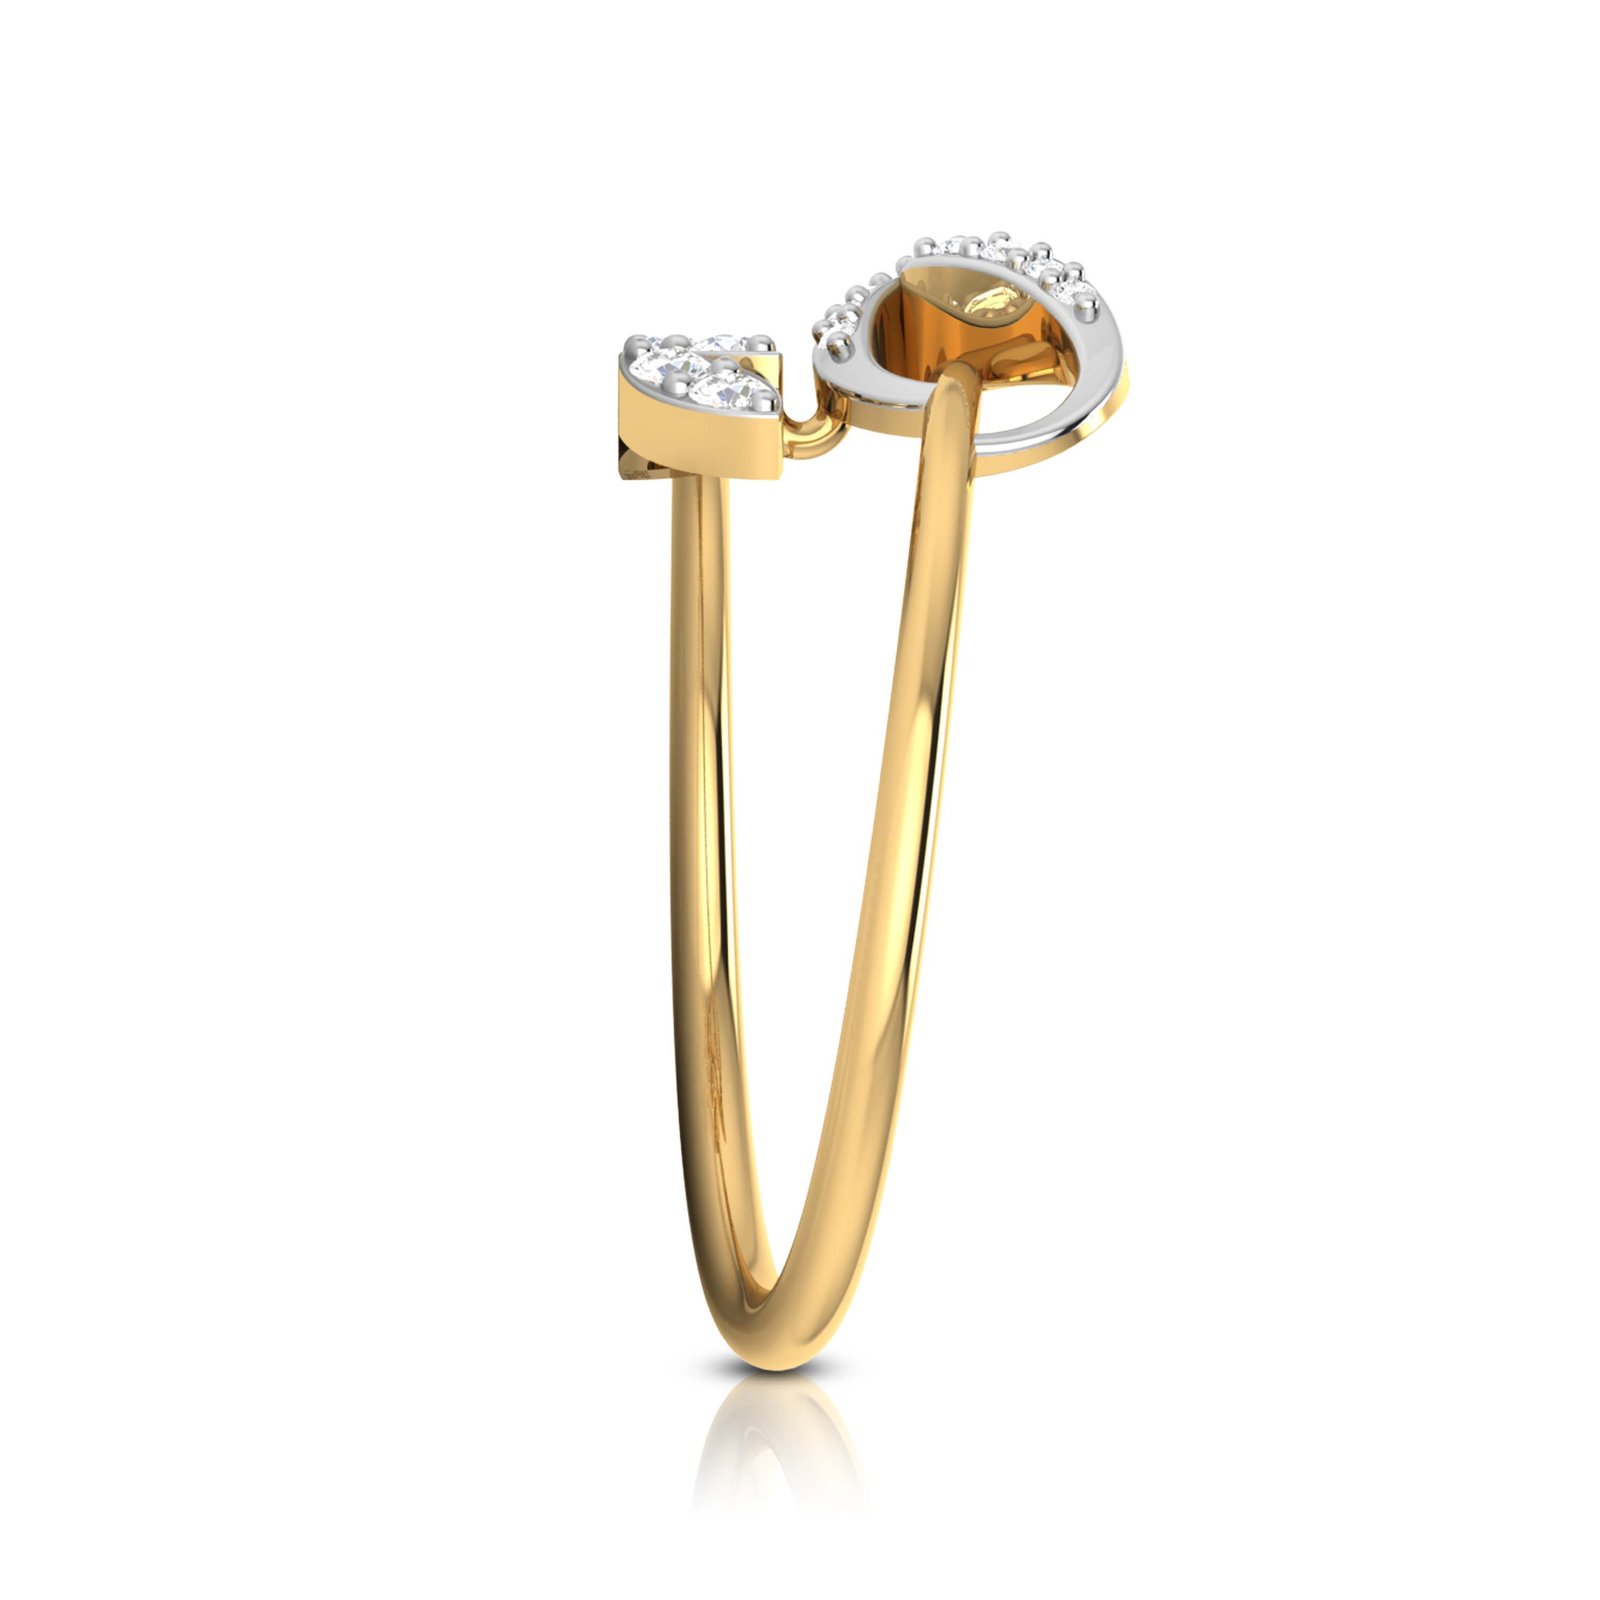 Enchanted Diamond Ring In pure Gold By Dhanji Jewels